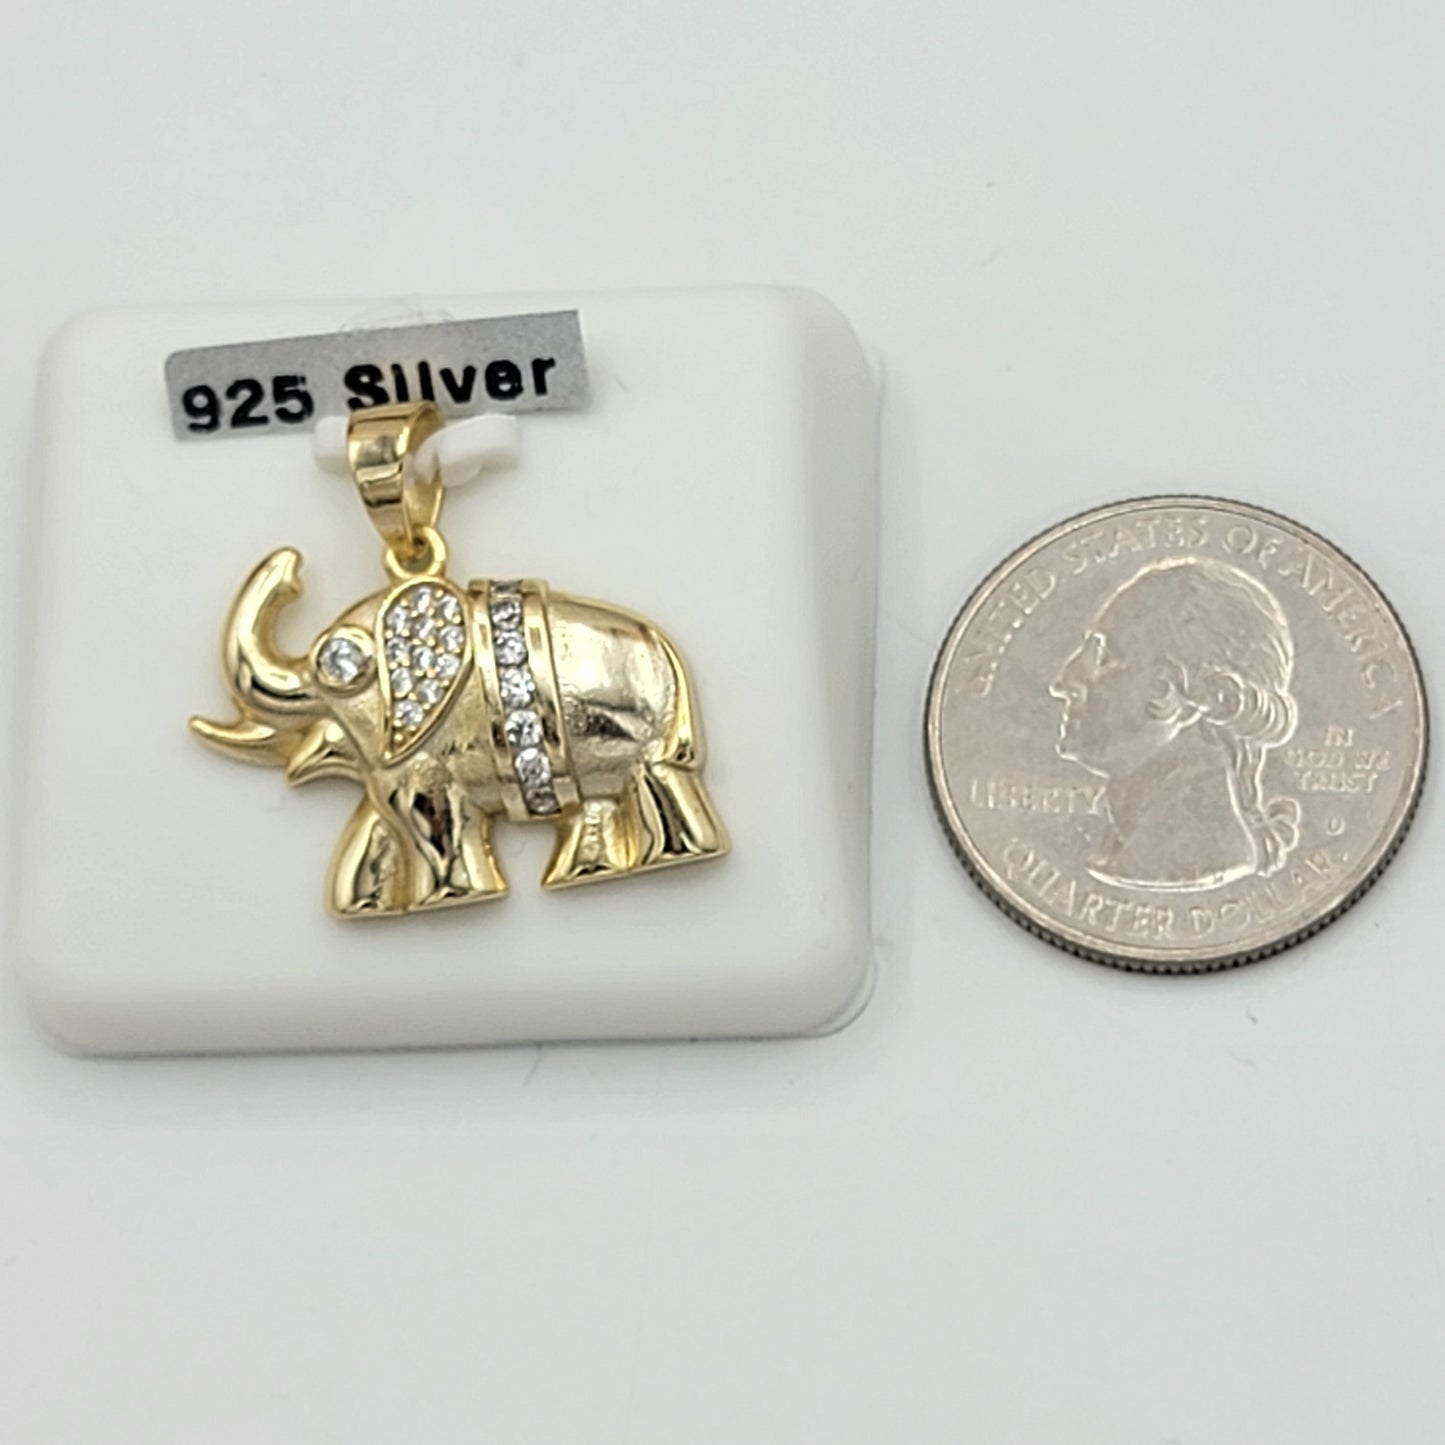 Solid 925 Sterling Silver - Gold Plated. CZ Cute Elephant Pendant & Chain.